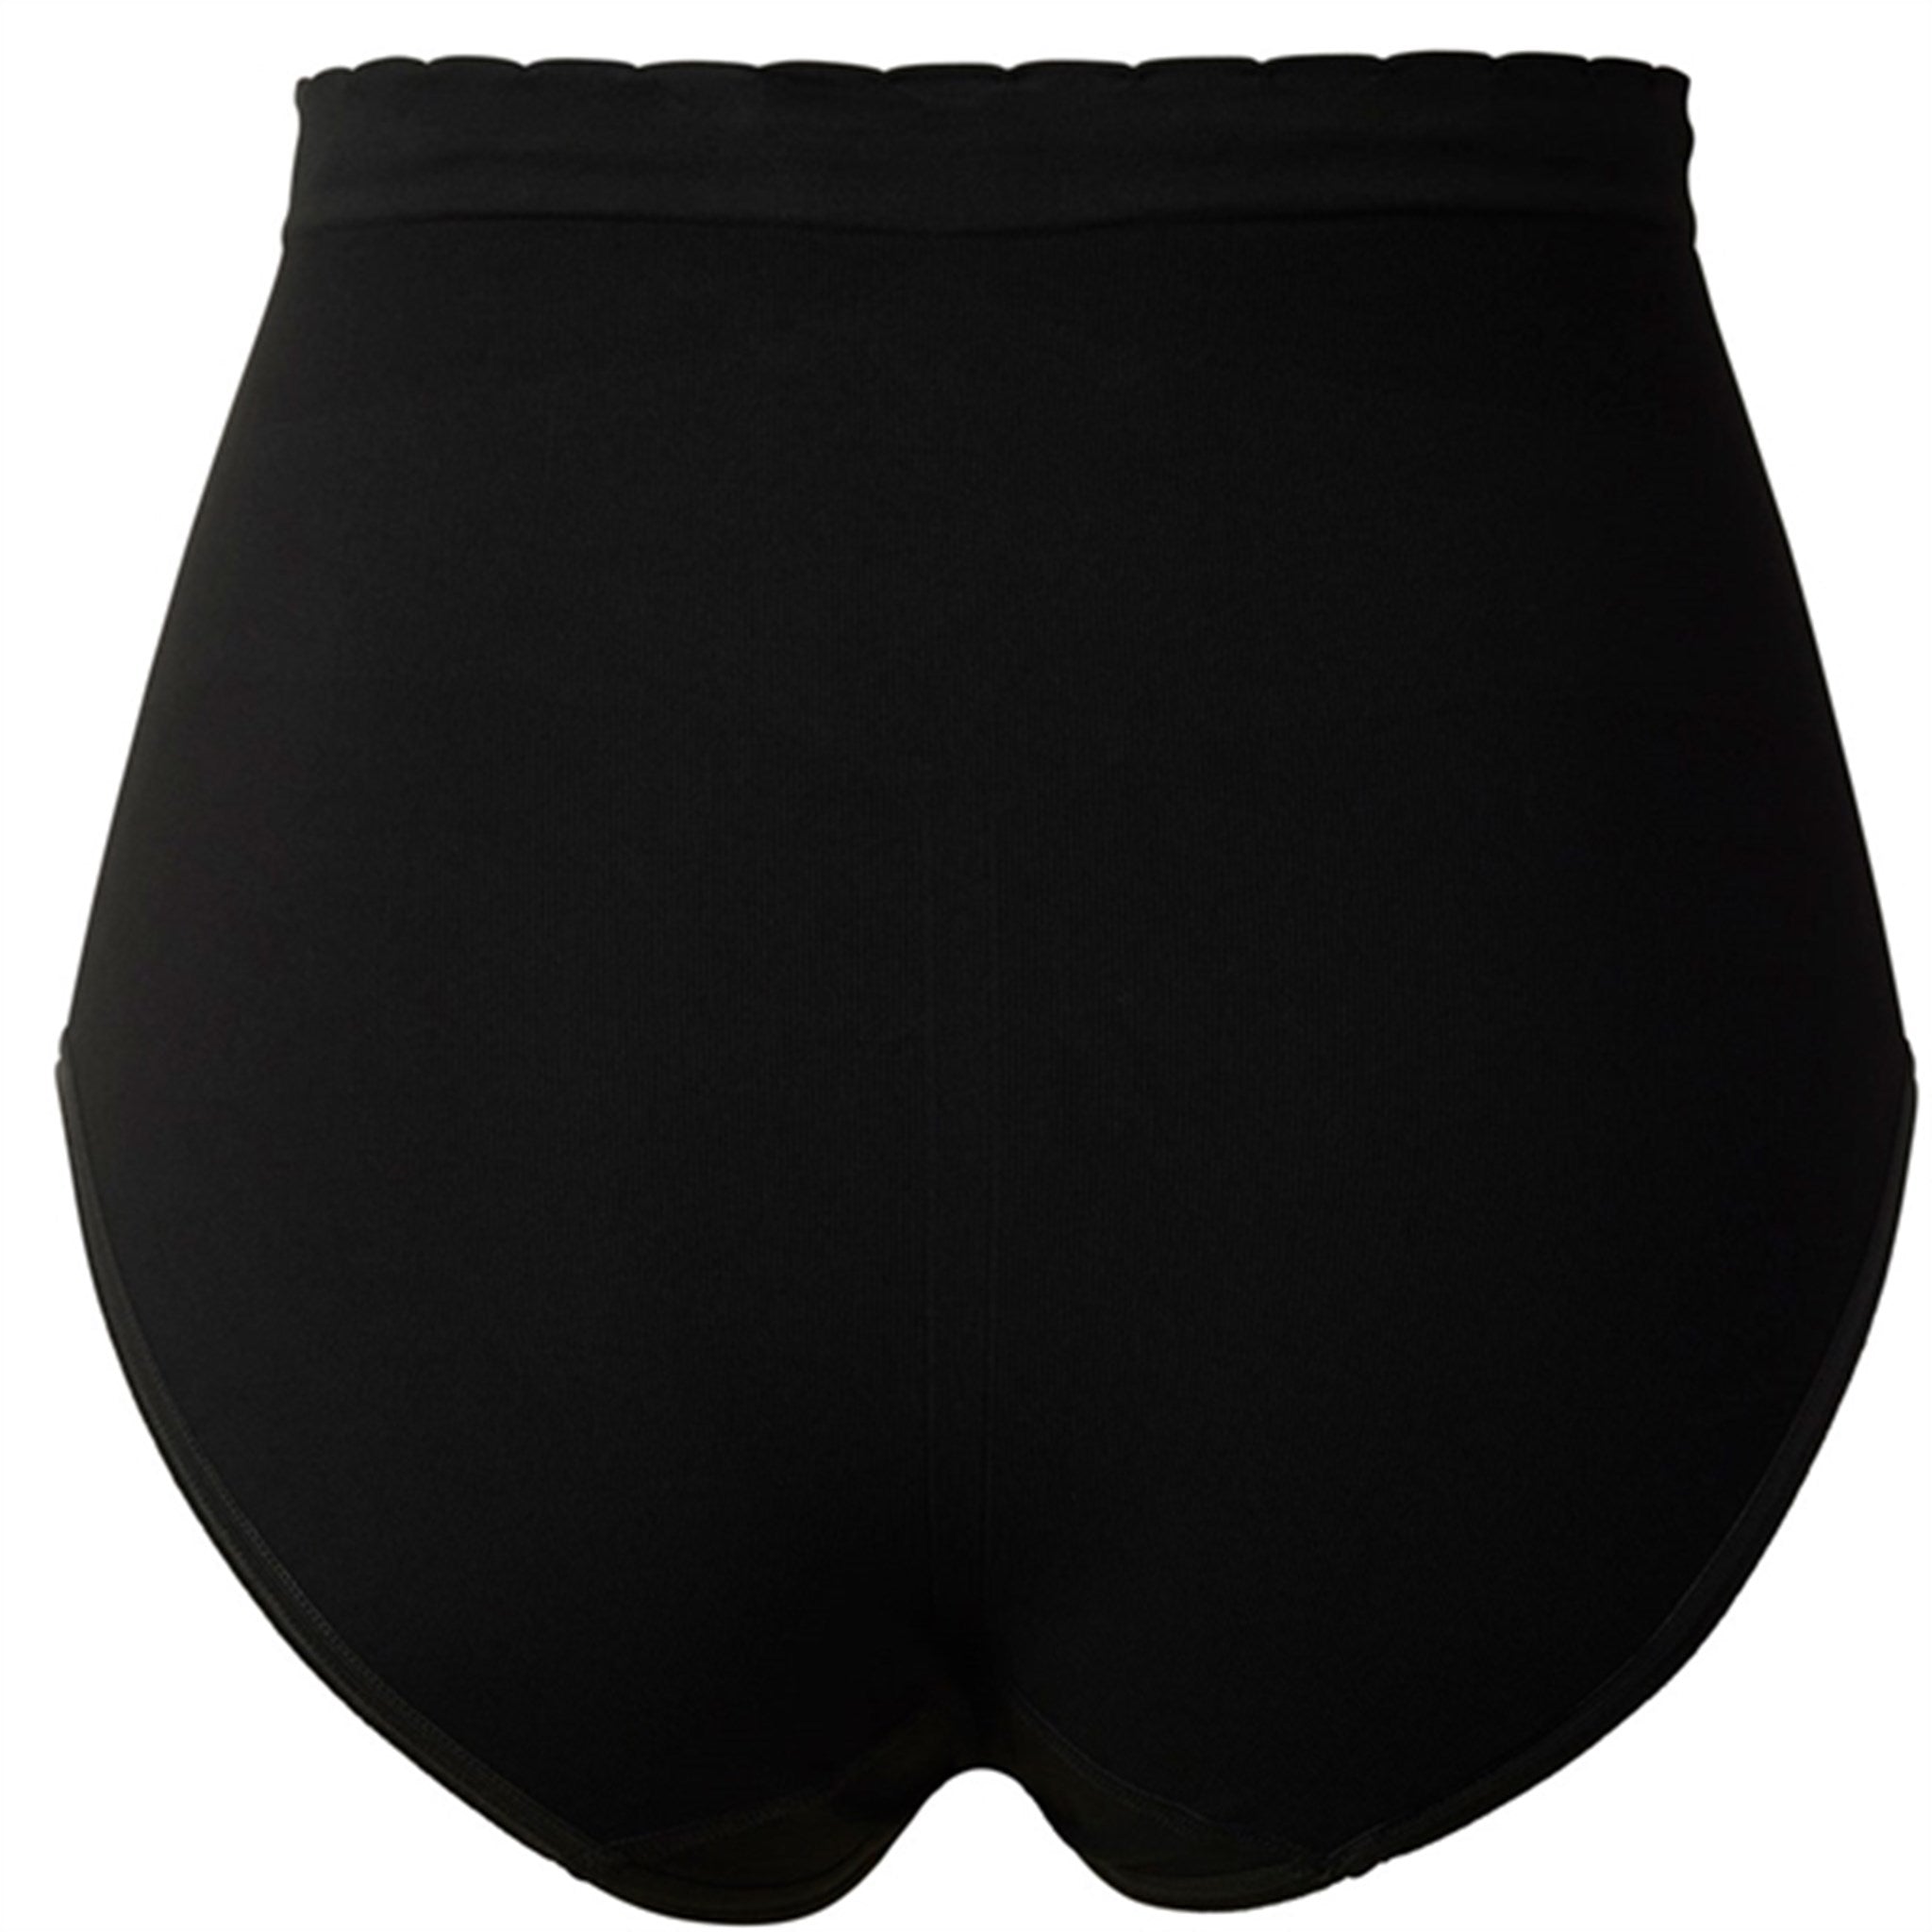 momkind C-section Panties – Support Scar and Belly Black 6